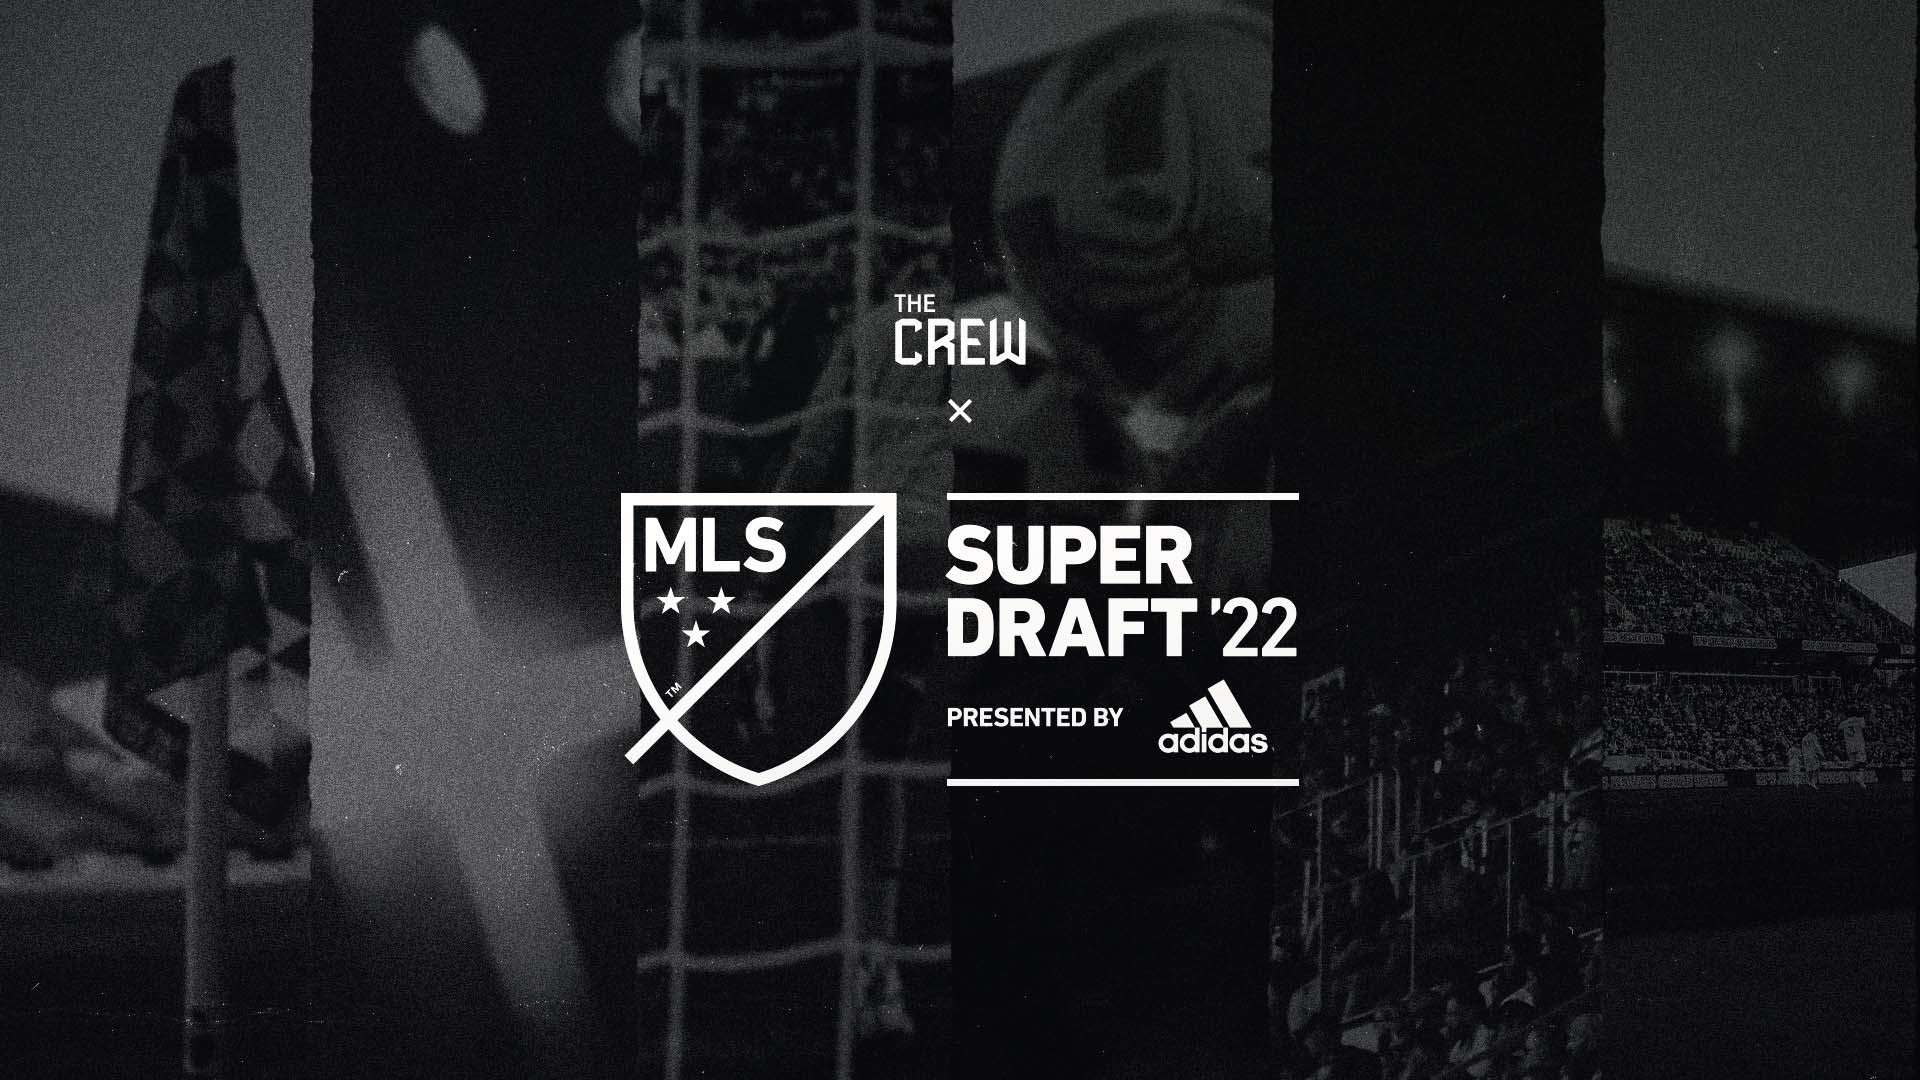 Revolution Make Two Selections in 2022 MLS SuperDraft